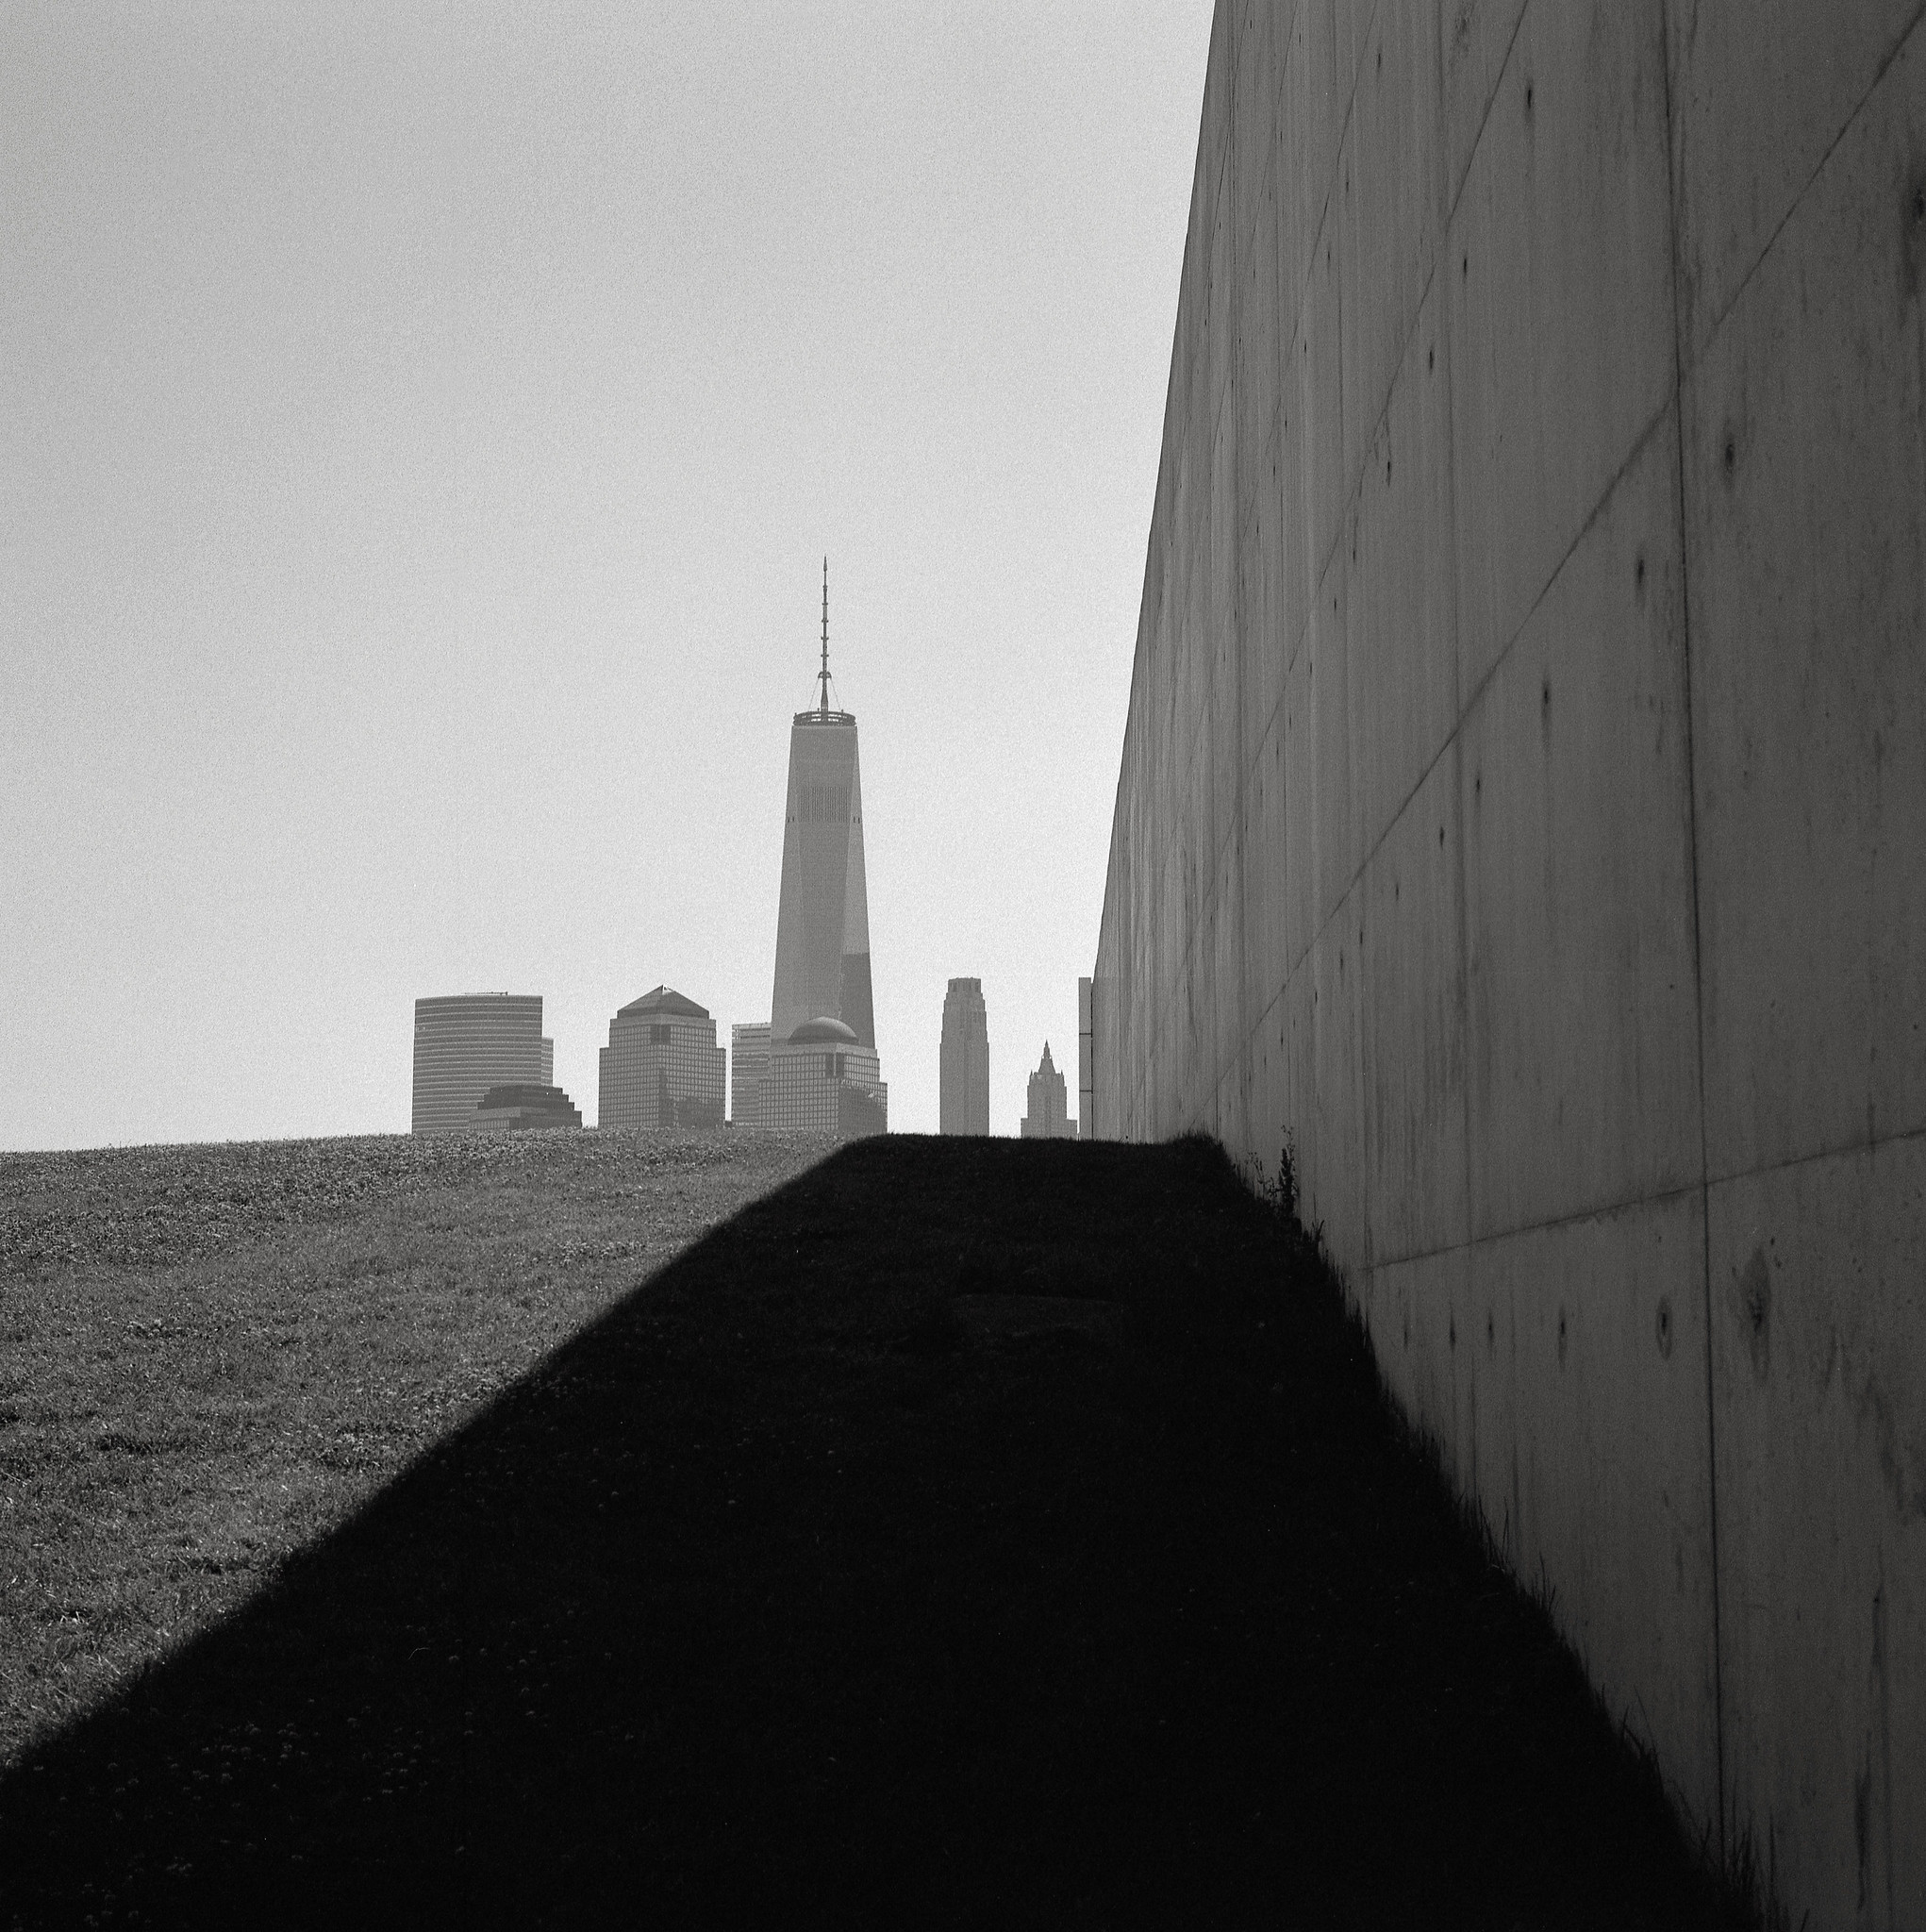 Shadow, 9/11 Empty Sky Memorial, Liberty State Park, New Jersey